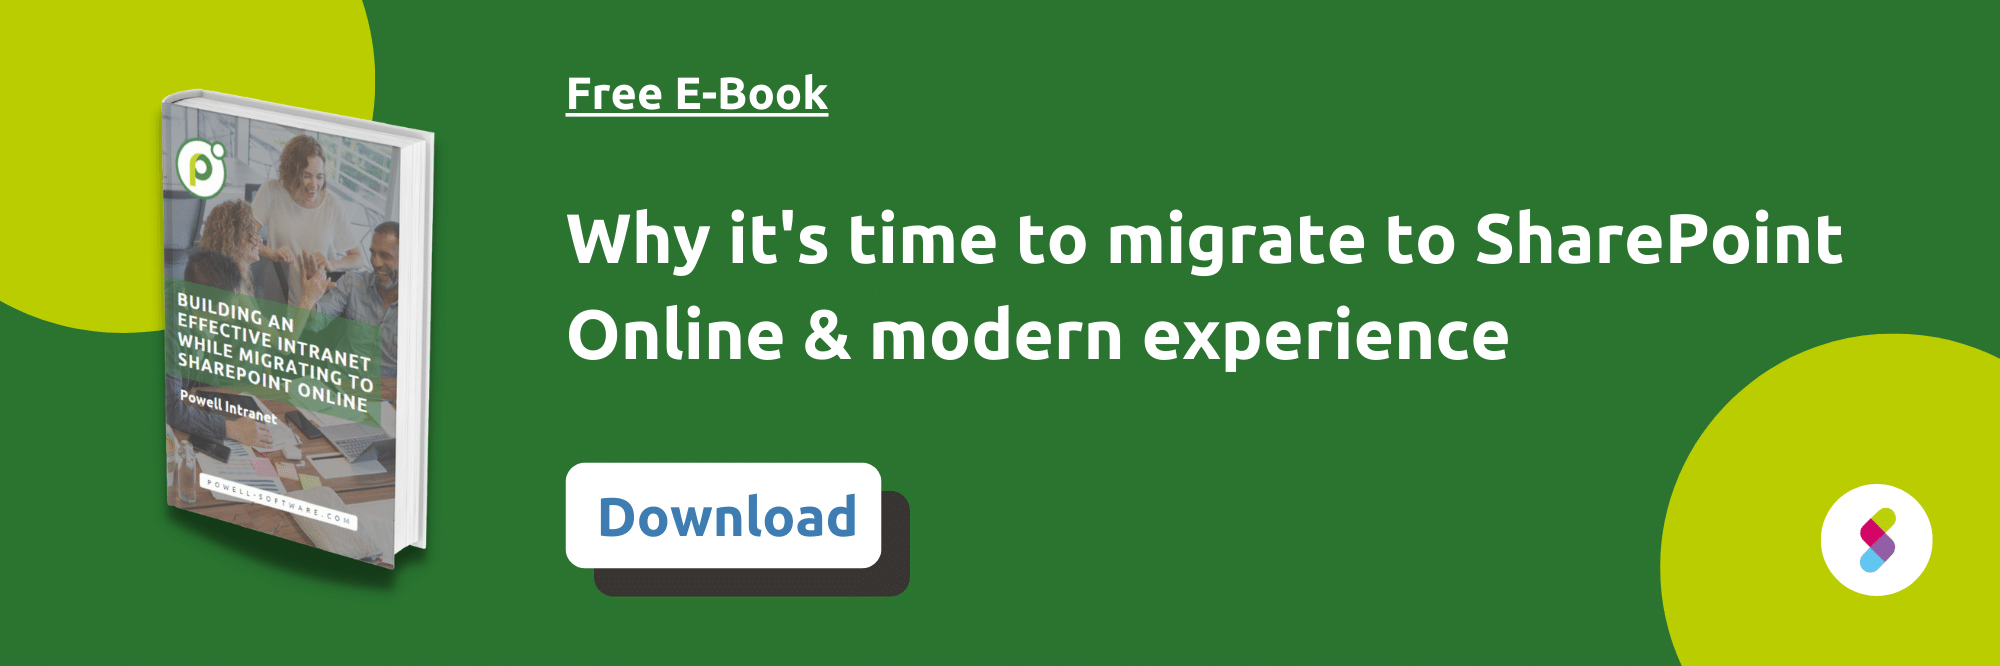 Ebook - Migrate to SharePoint Online - CTA